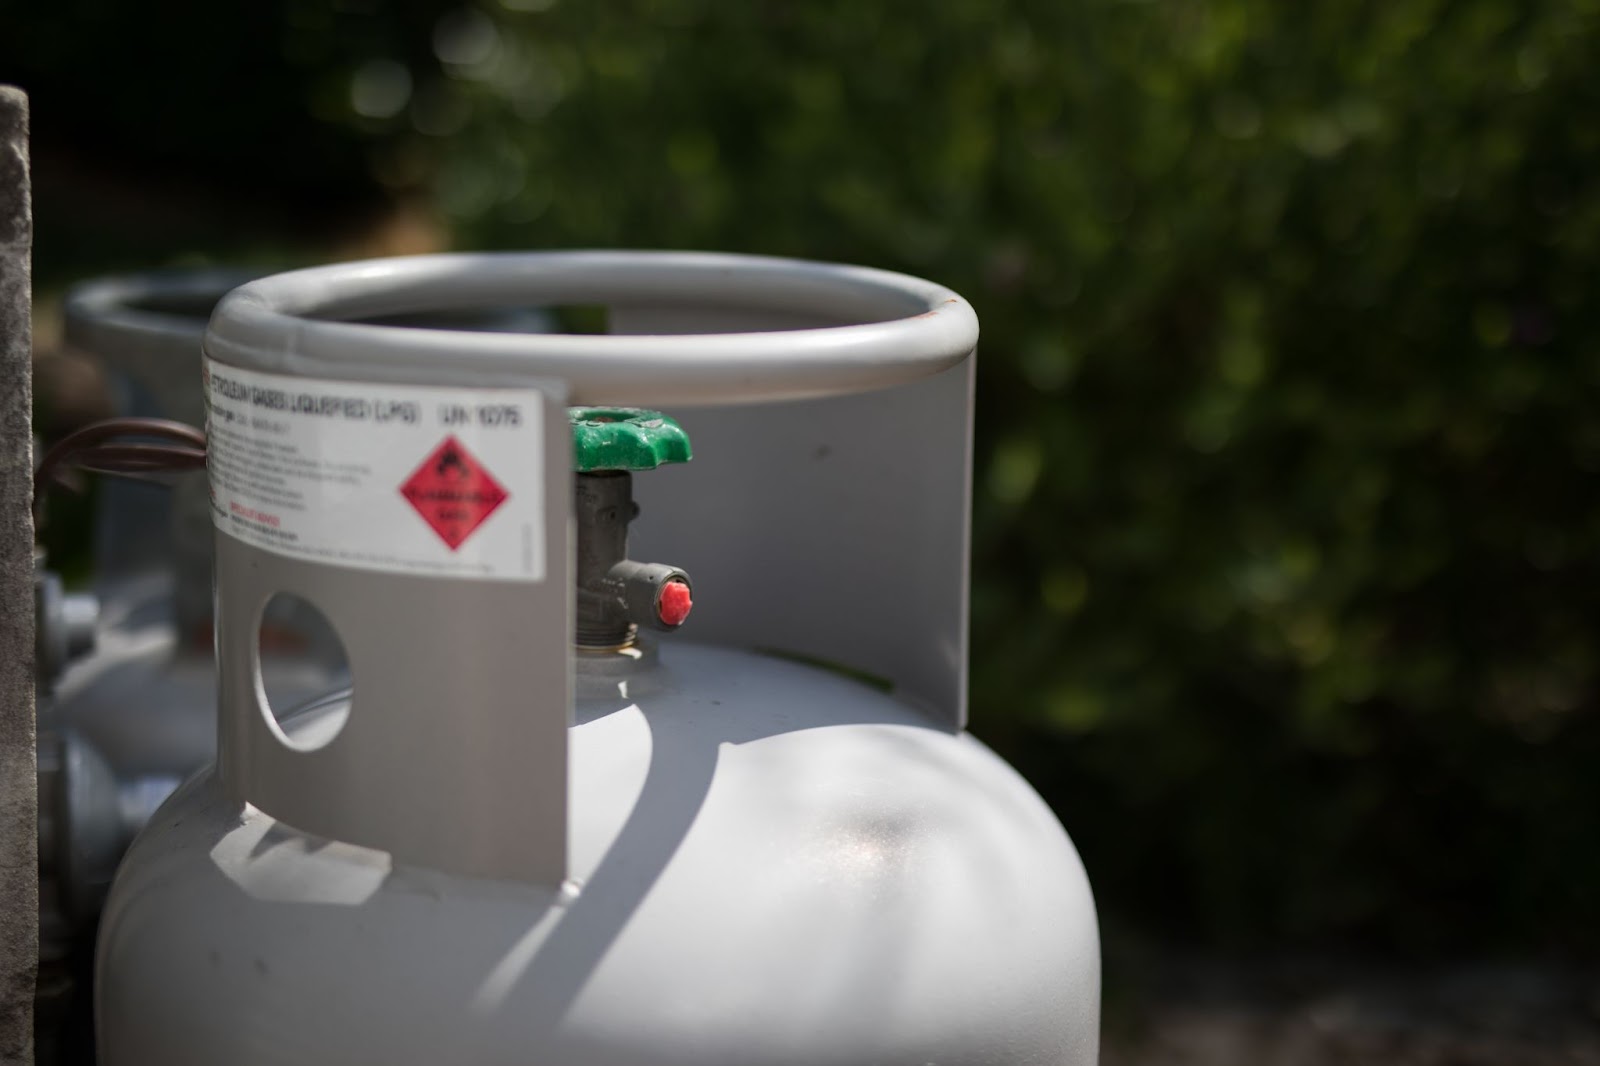 A sturdy outdoor propane gas tank stands ready for residential use.